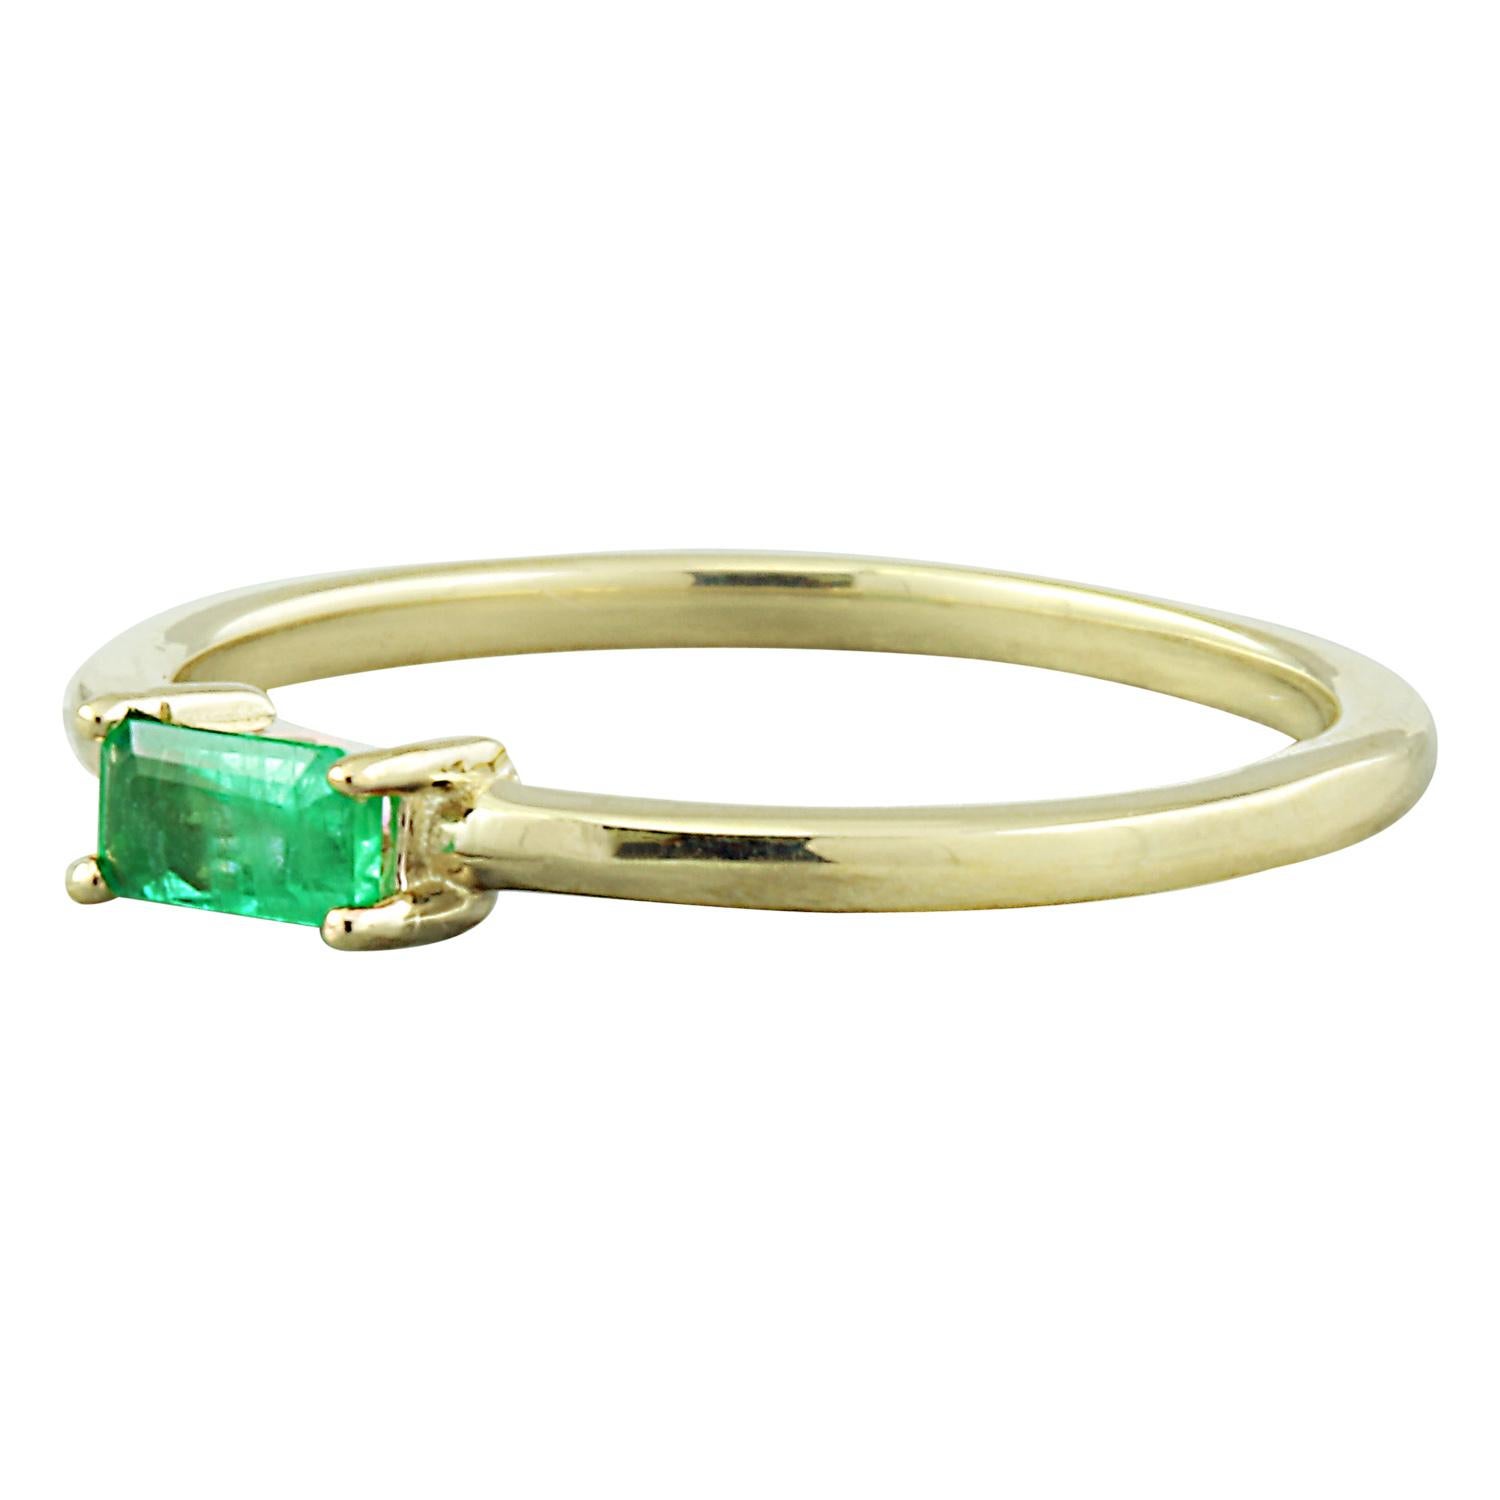 Presenting our delicate 0.25 Carat Natural Emerald Ring, meticulously crafted in luxurious 14K Solid Yellow Gold. This charming piece features a petite emerald weighing 0.25 Carats, with dimensions of 5.00x2.00 millimeters, exuding a vibrant green